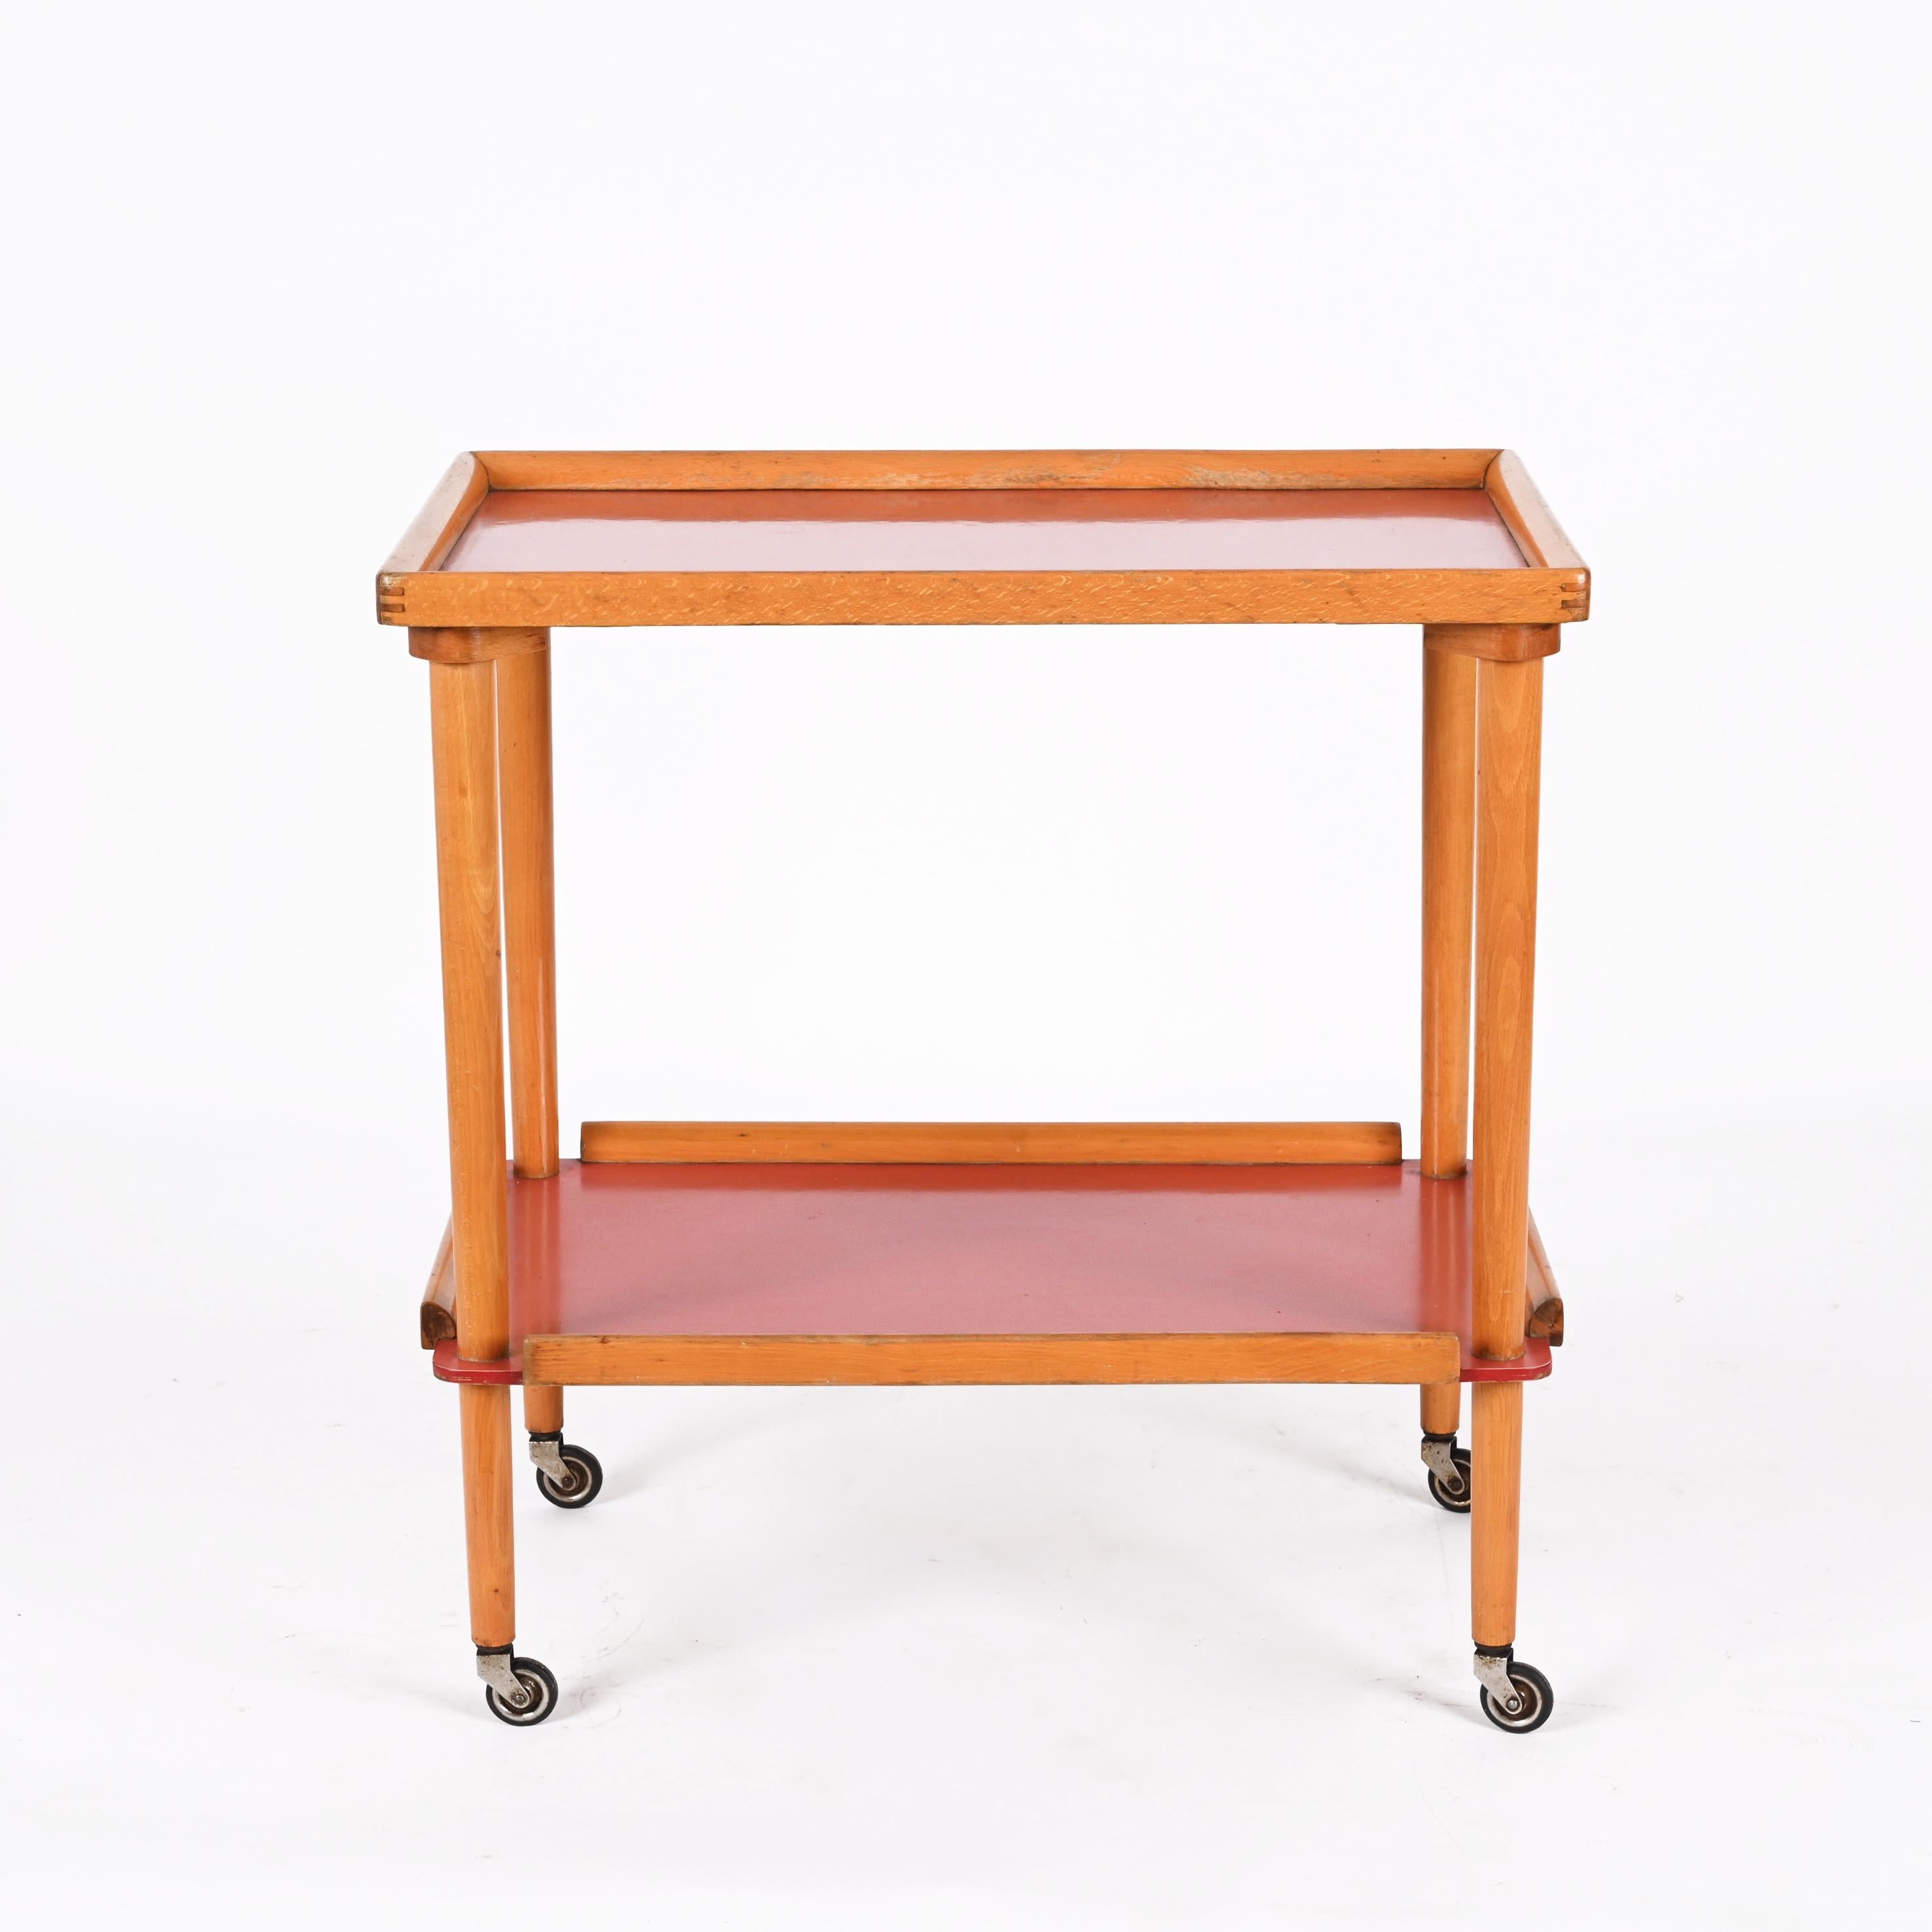 Midcentury Italian Beech Wood and Formica Red Two Tiered Bar Cart, 1960s For Sale 7